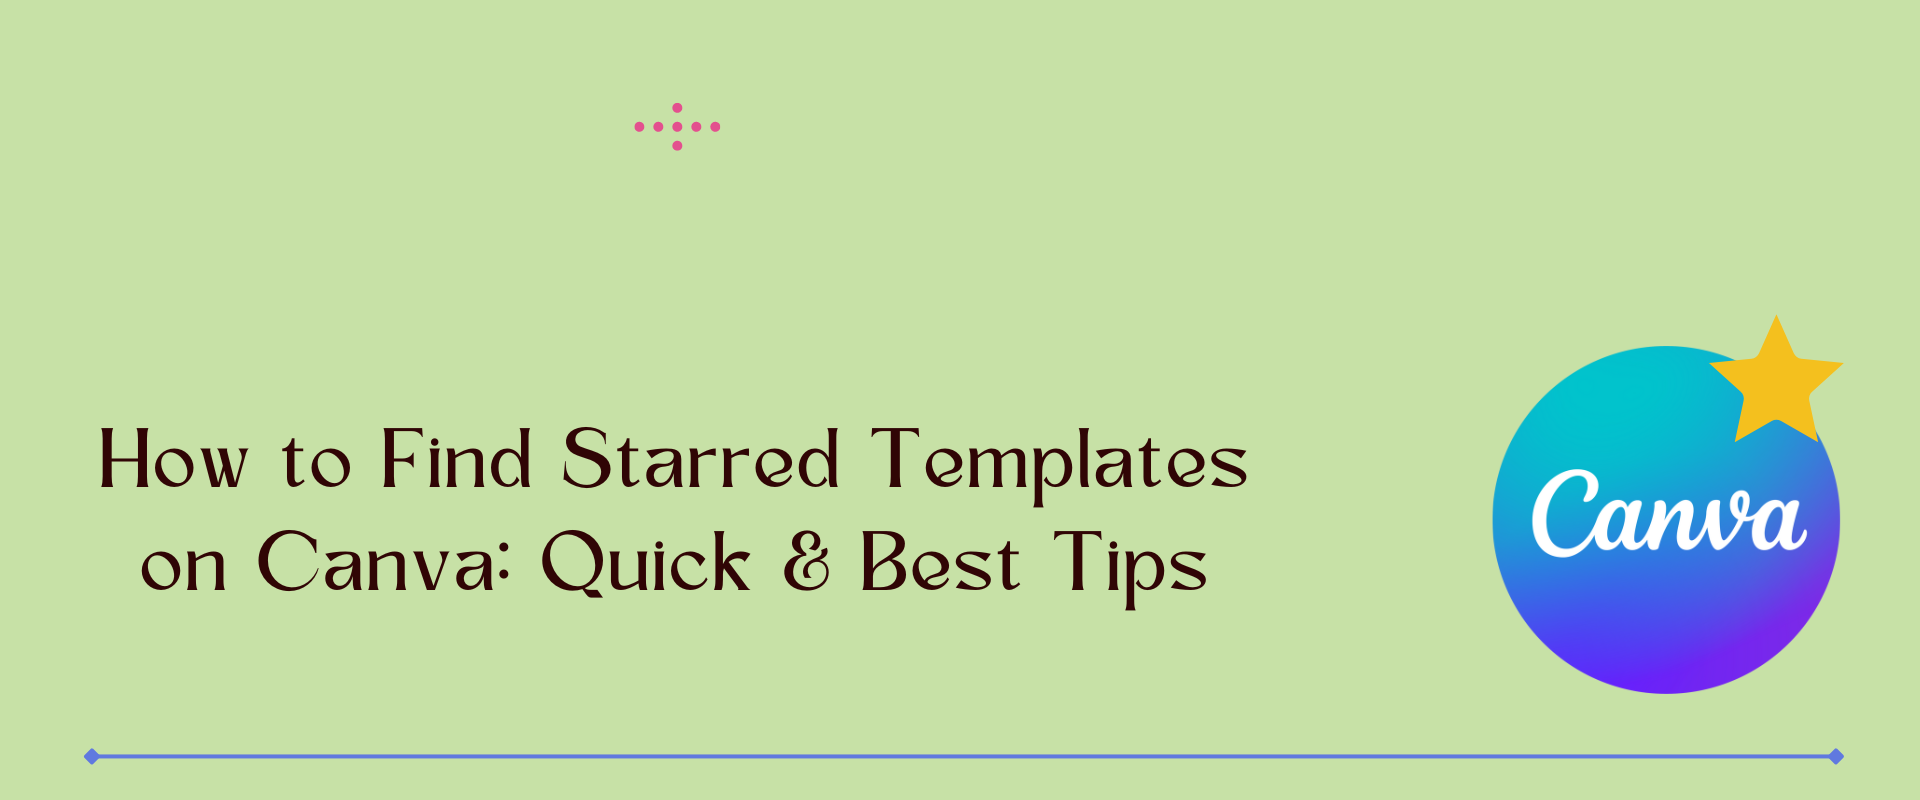 How to Find Starred Templates on Canva: Quick & Best Tips